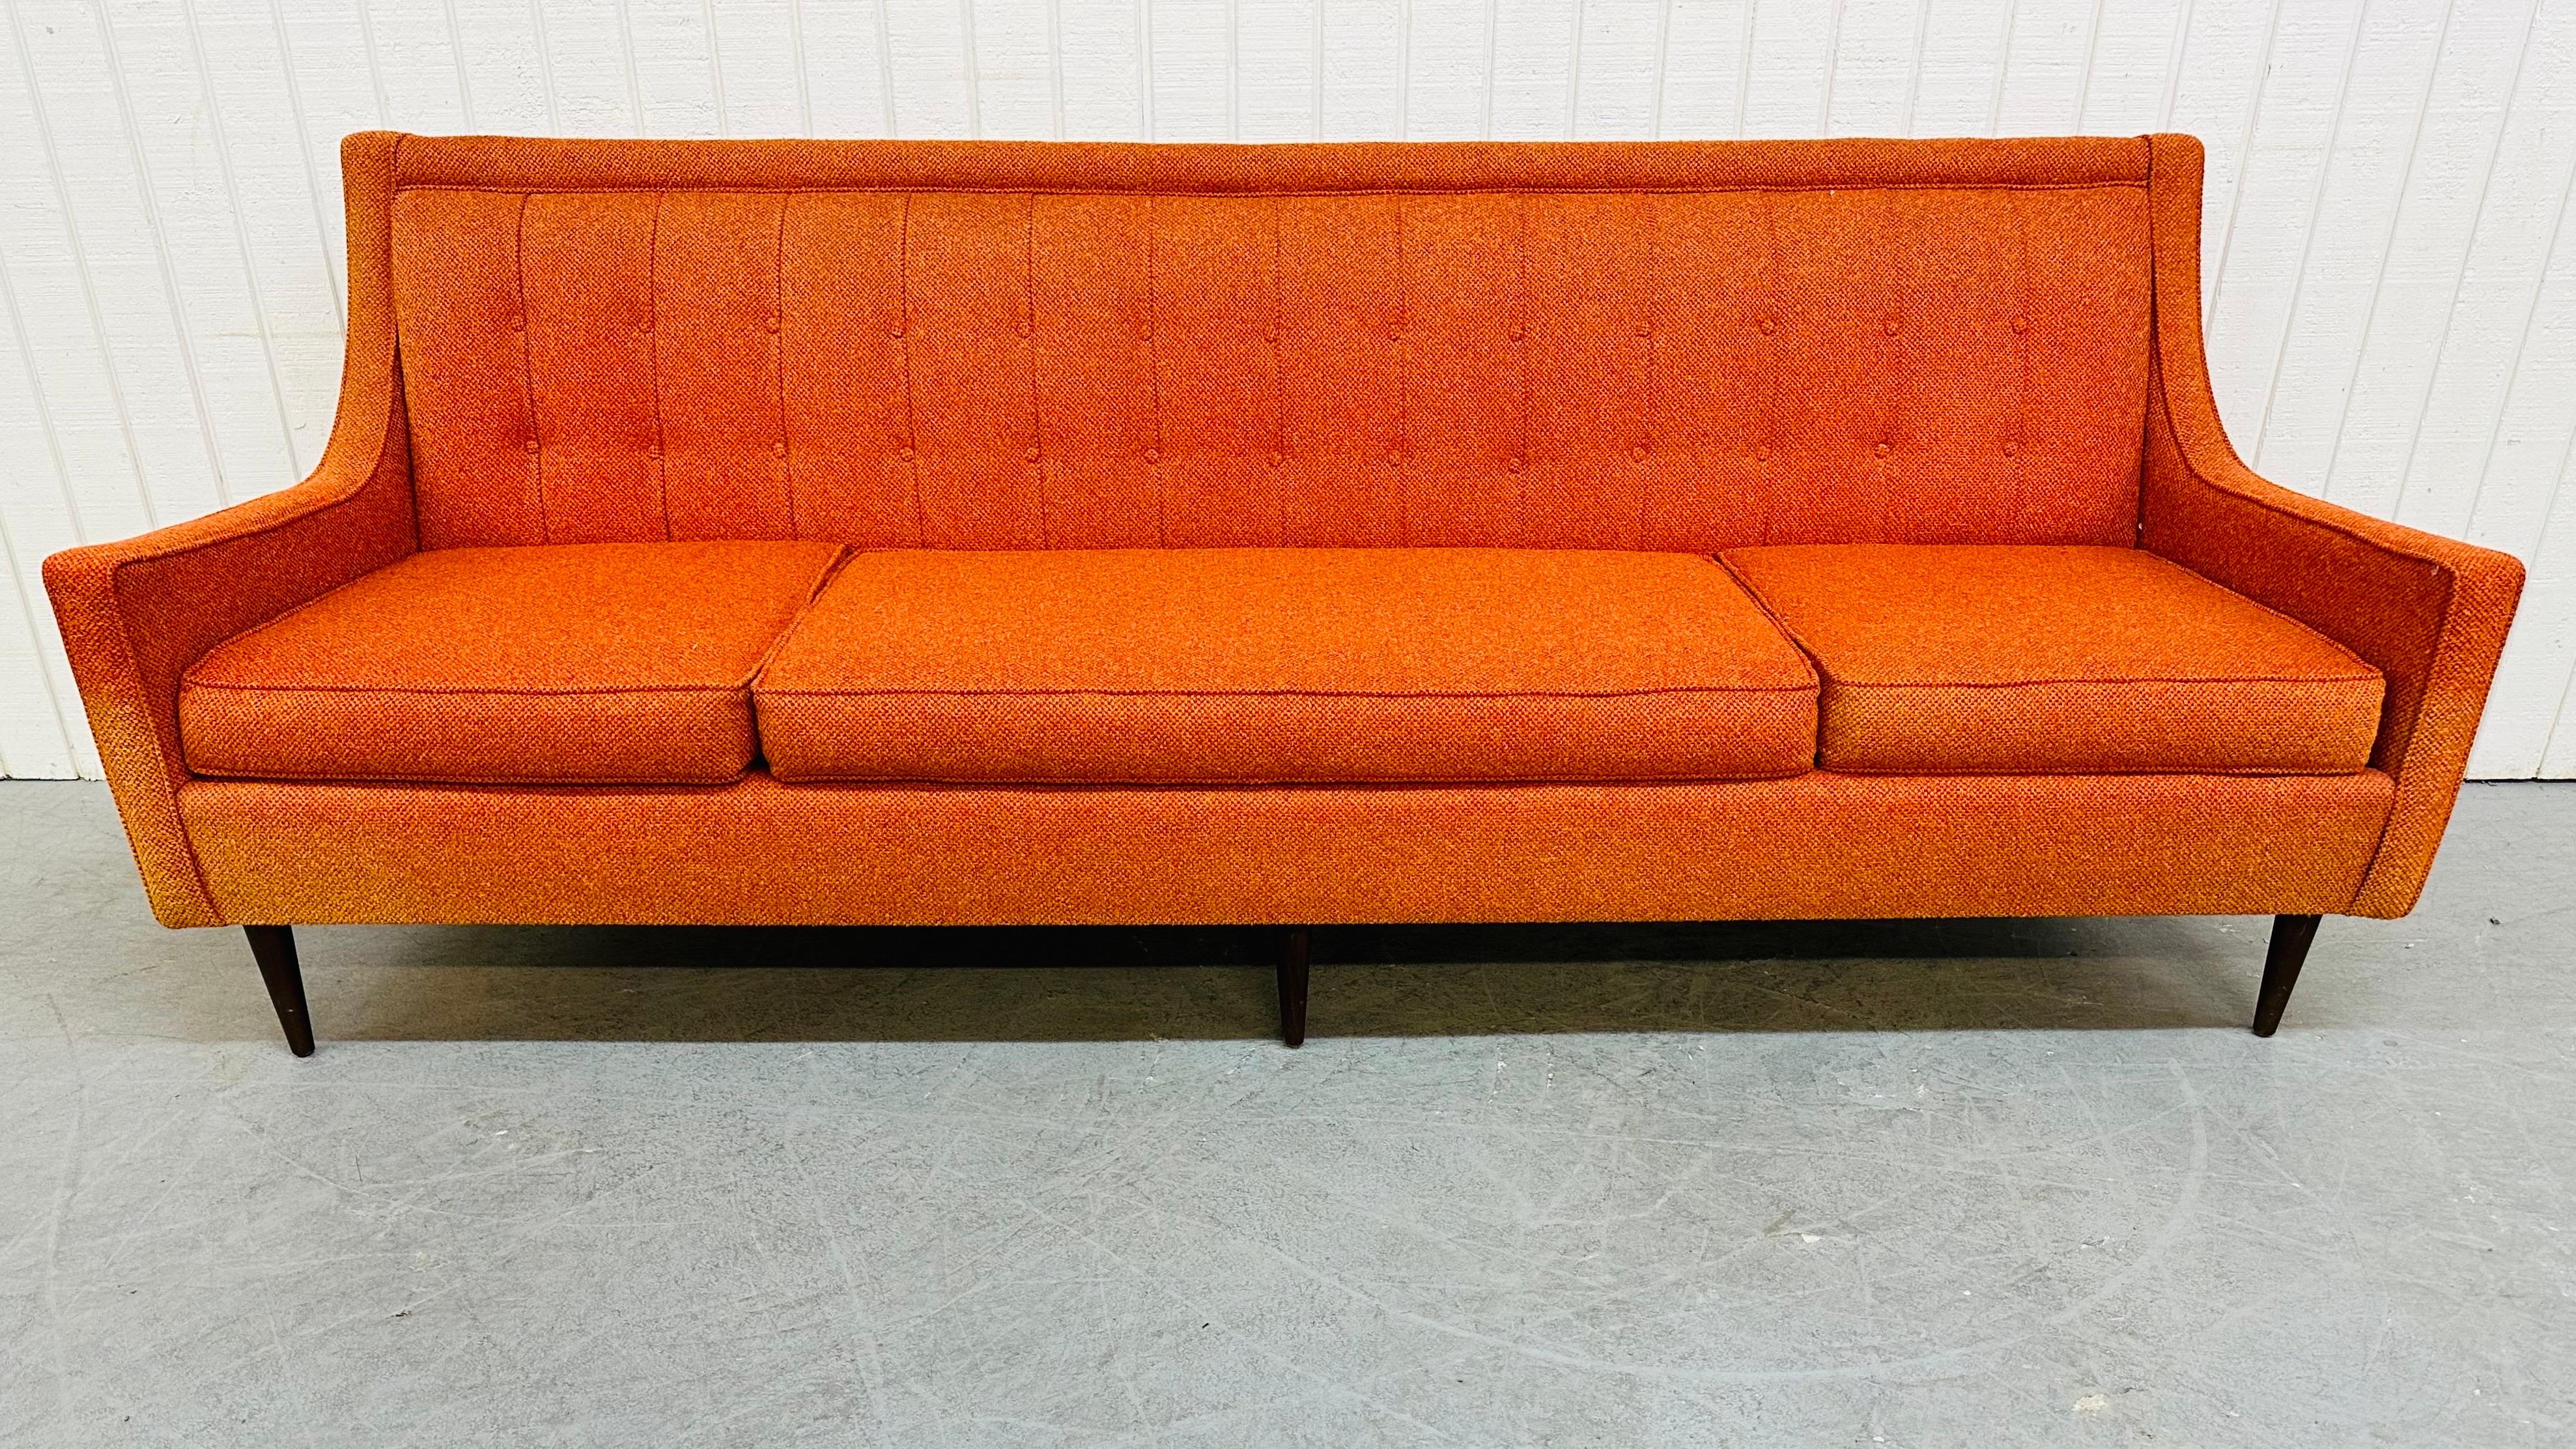 This listing is for a Mid-Century Modern Orange Sofa. Featuring space for 3-4 people to sit, removable cushions, walnut legs, and a beautiful original orange upholstery.